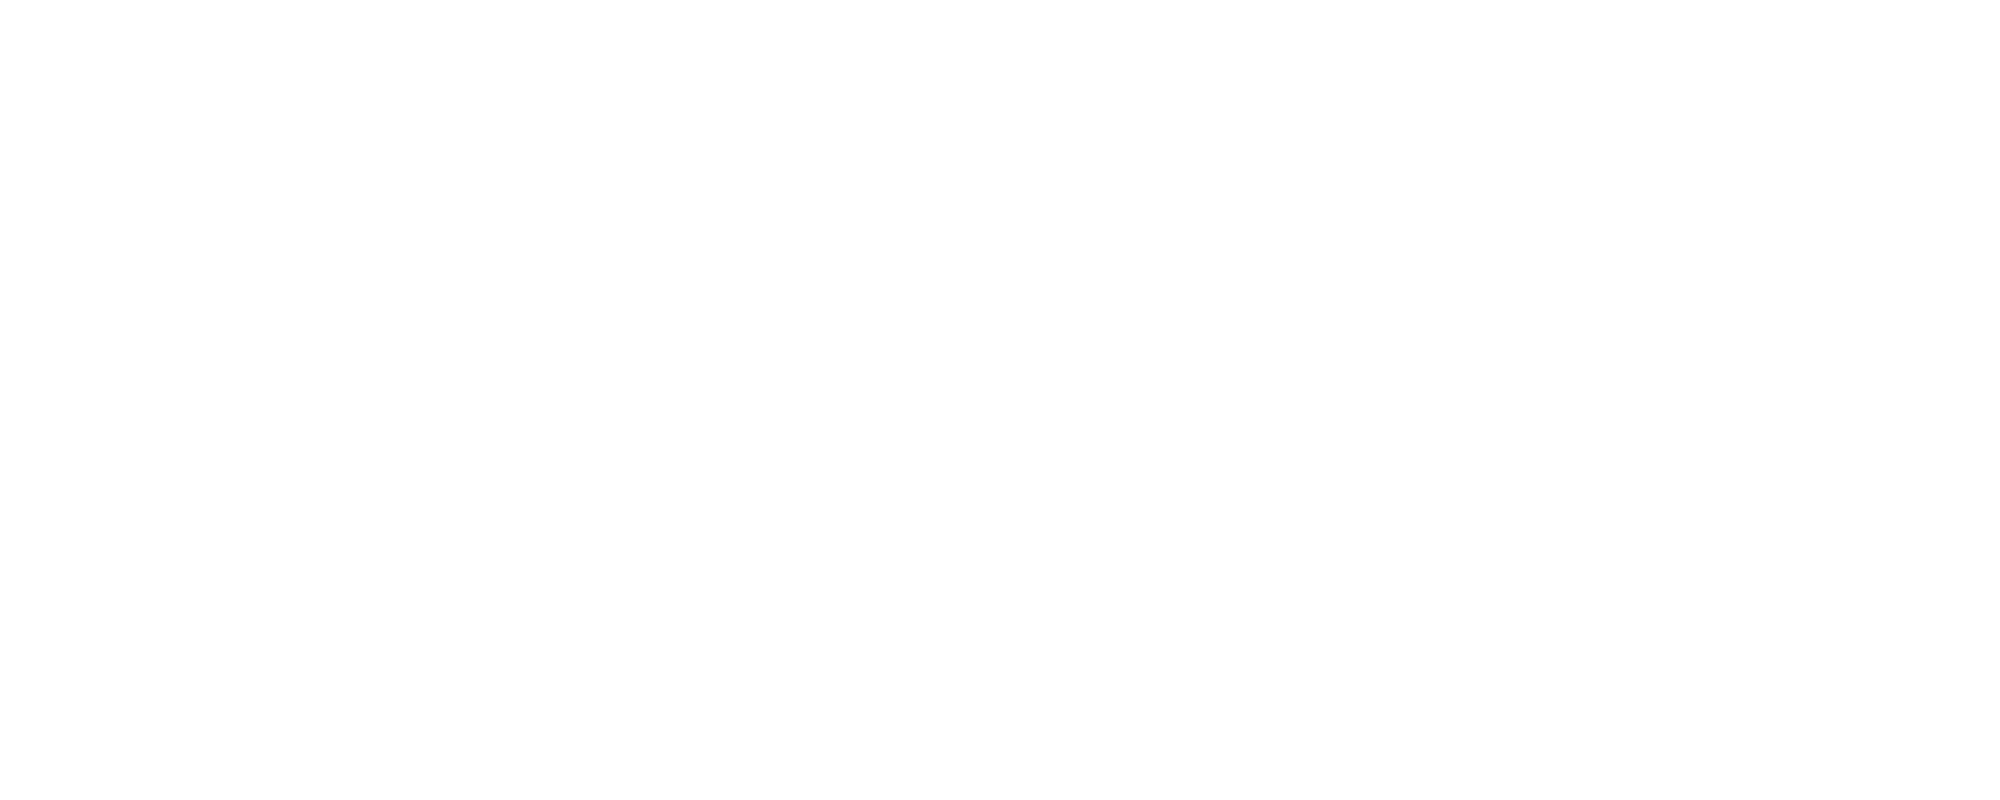 CHARLES SEGARS, CEO OF OVATION TV, STATEMENT ON THE ARTS UNDER THE BIDEN ADMINISTRATION